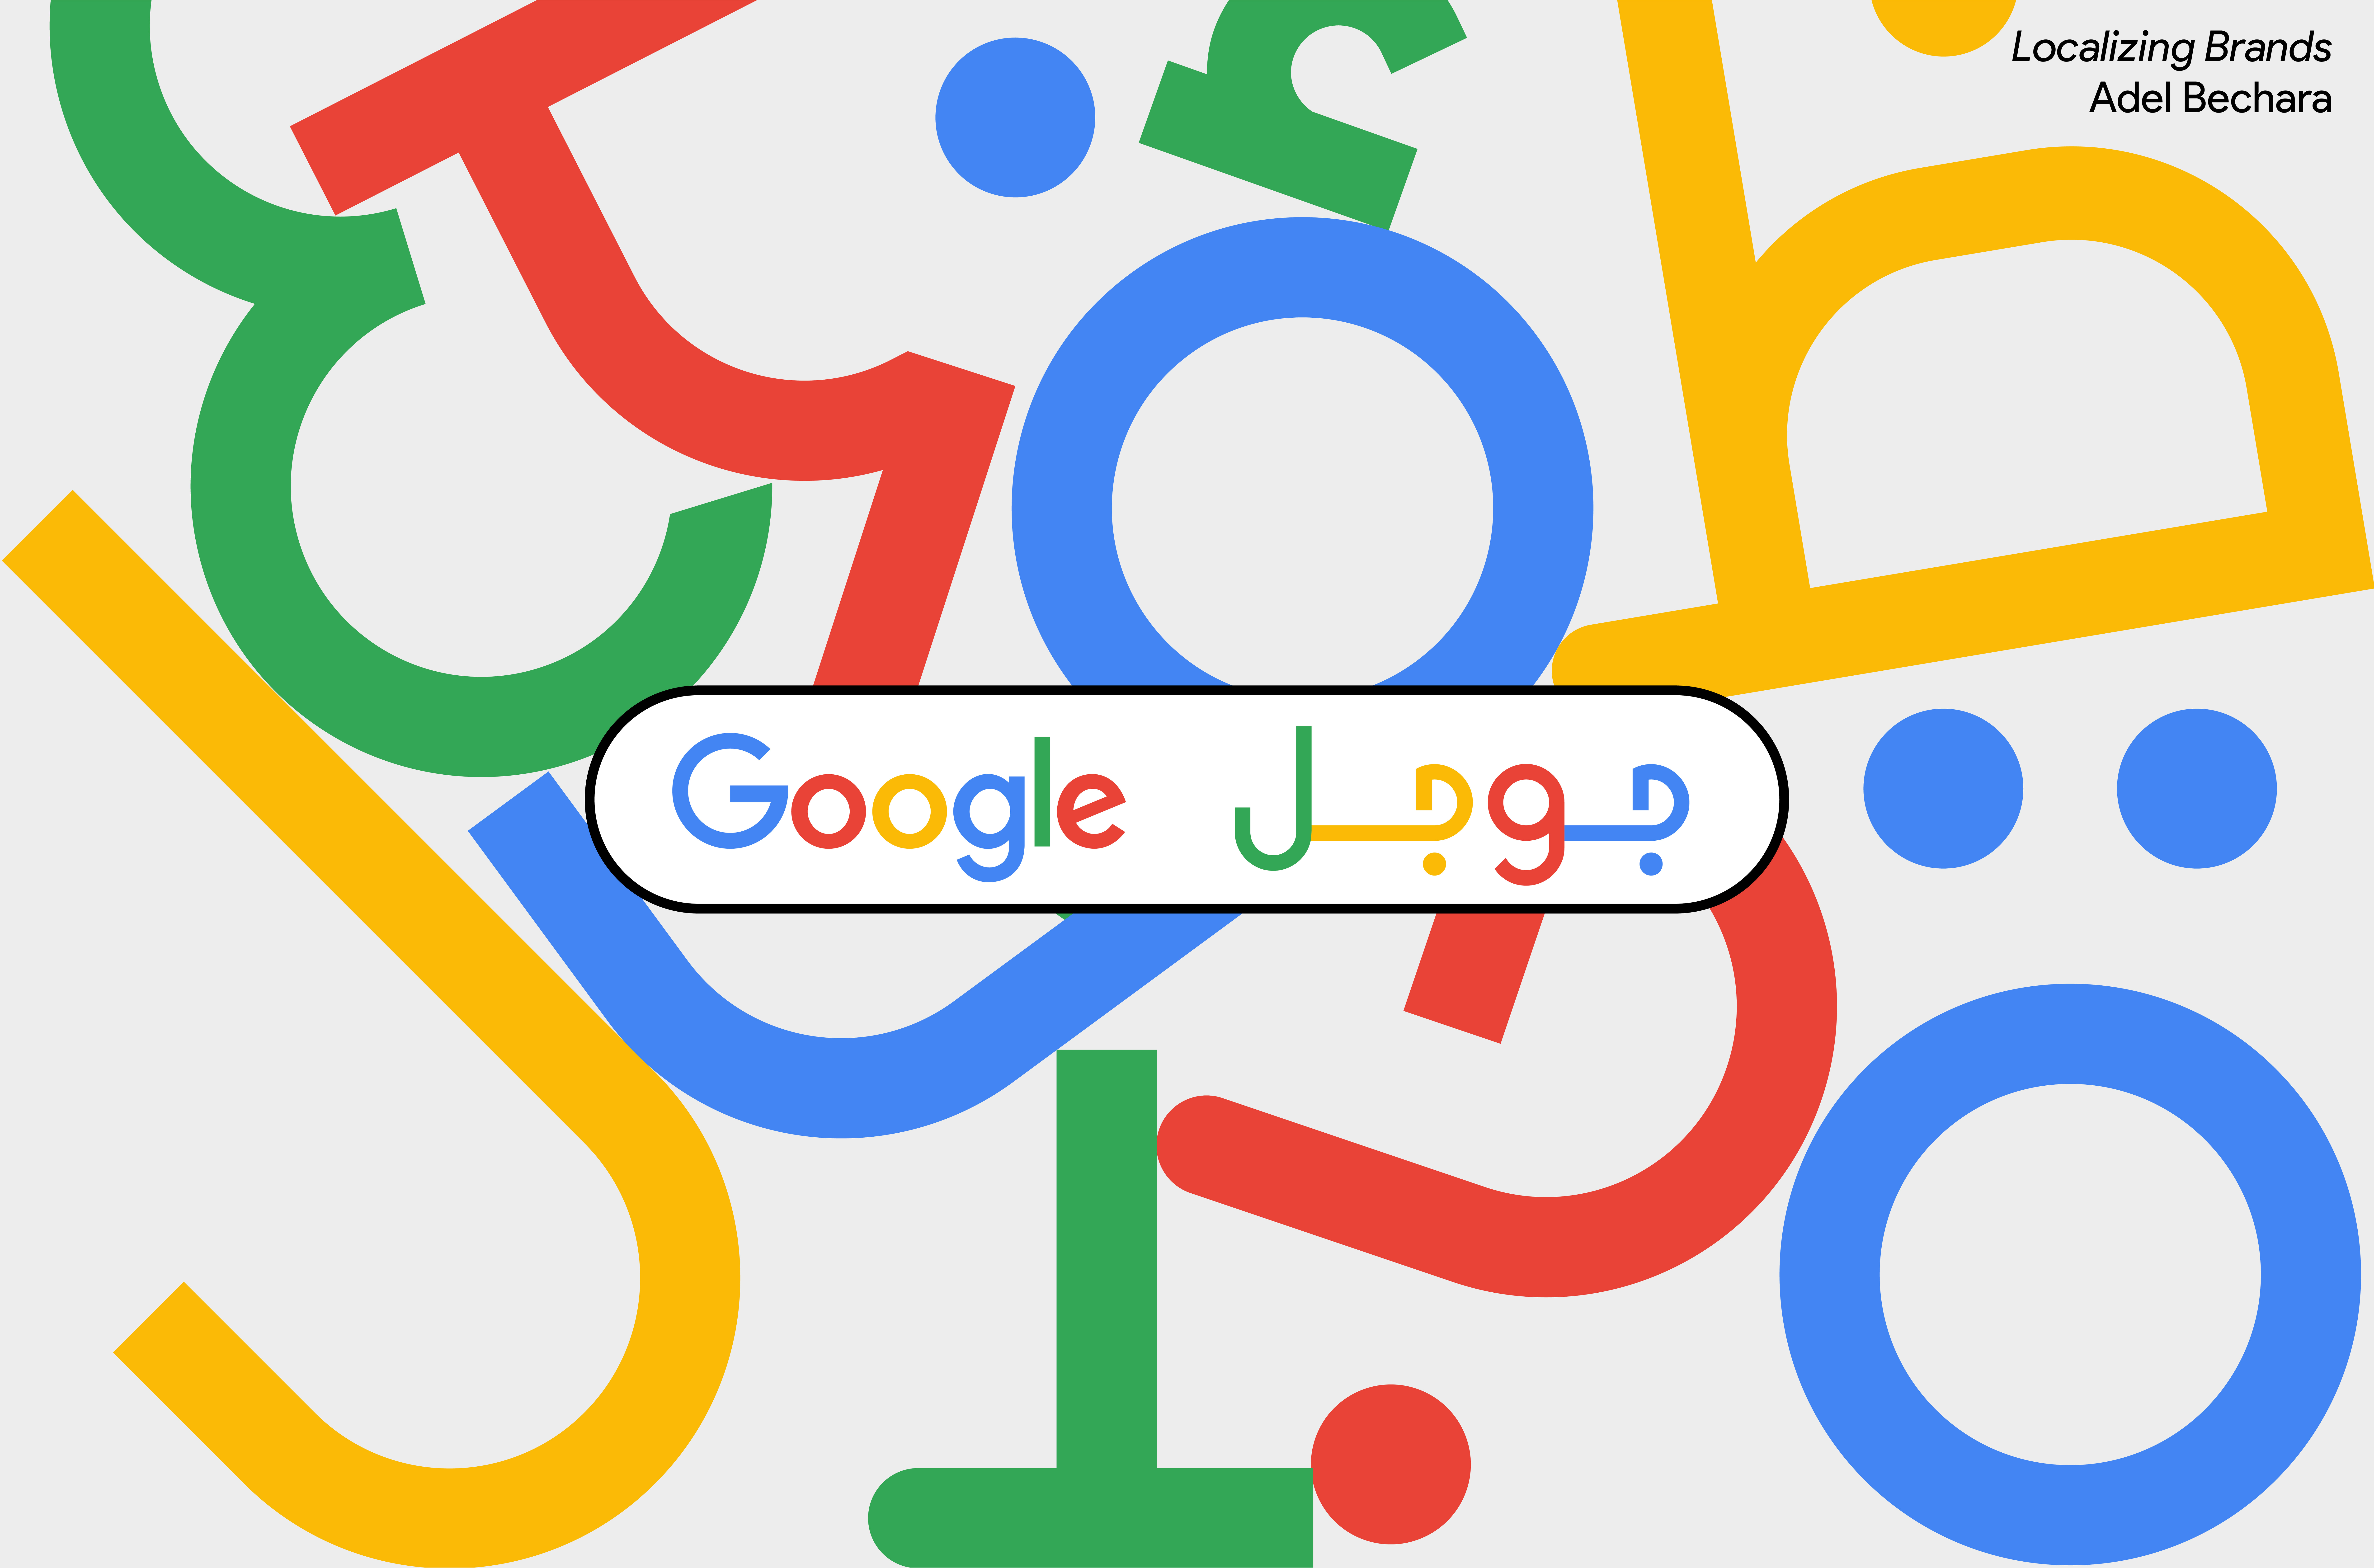 Large Arabic letters stylized to resemble Google's brand identity with their signature blue, yellow, red, green colour palette.